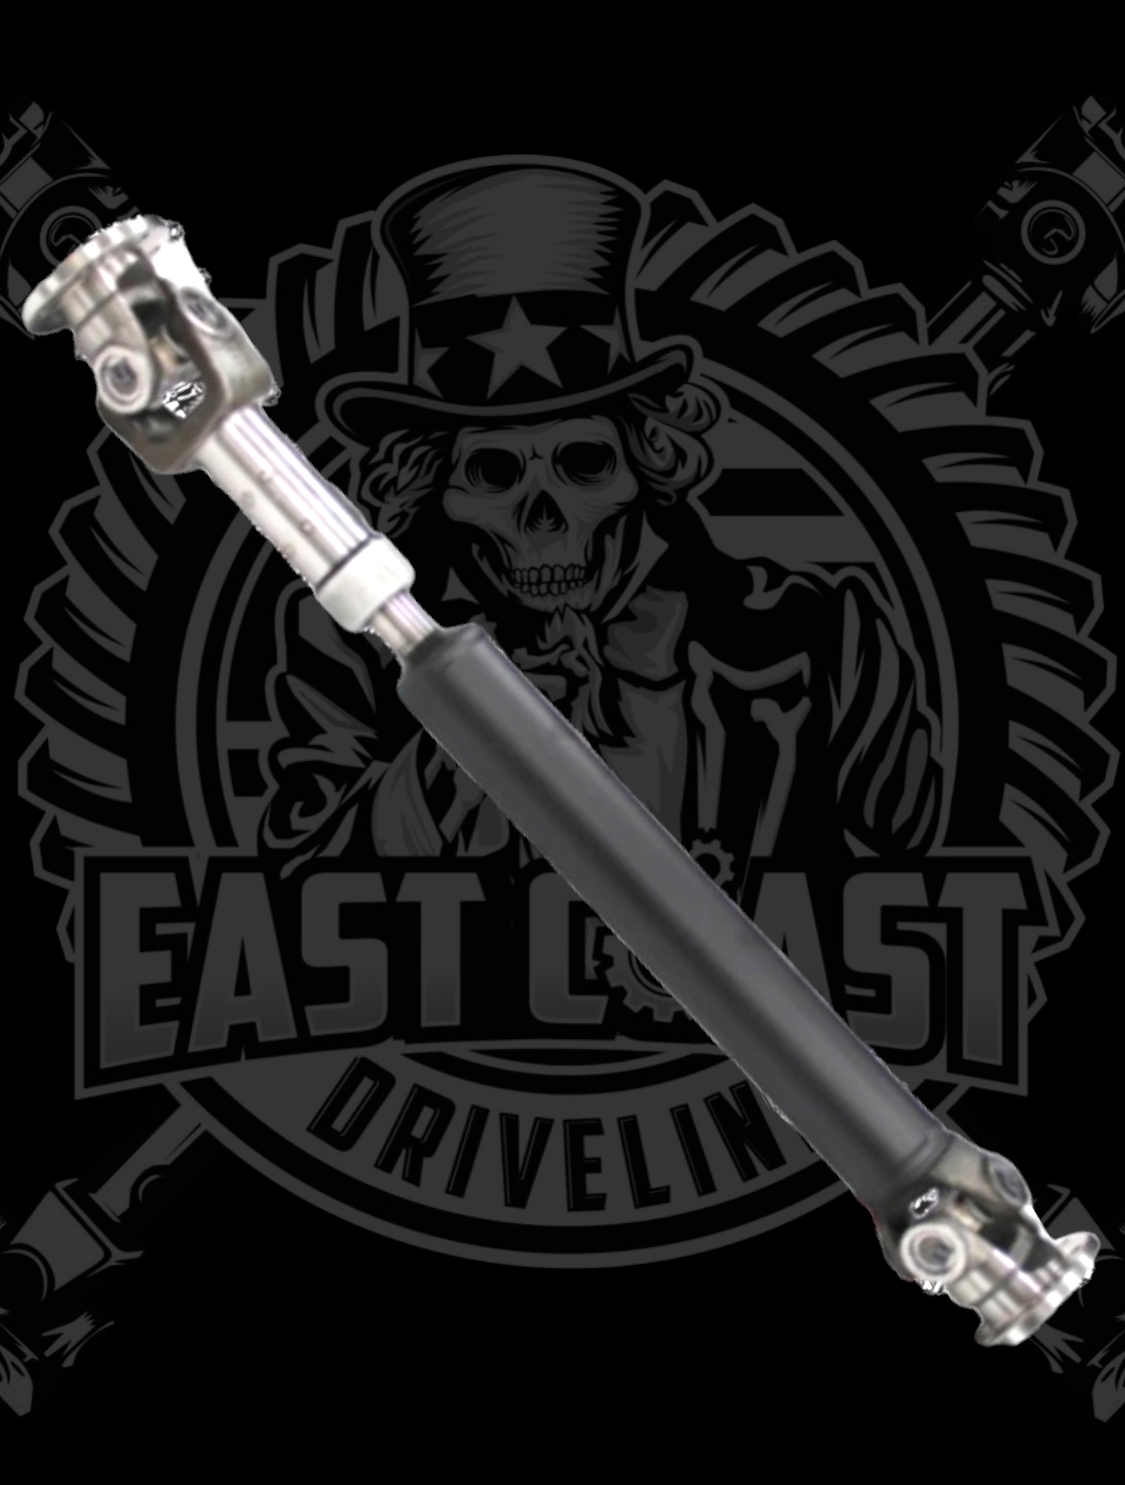 2004-2009 Honda S2000 RWD/2WD Rear Upgraded Driveshaft with Conversion from CV to U-Joint and Flange Yoke with 10mm Bolt Kit